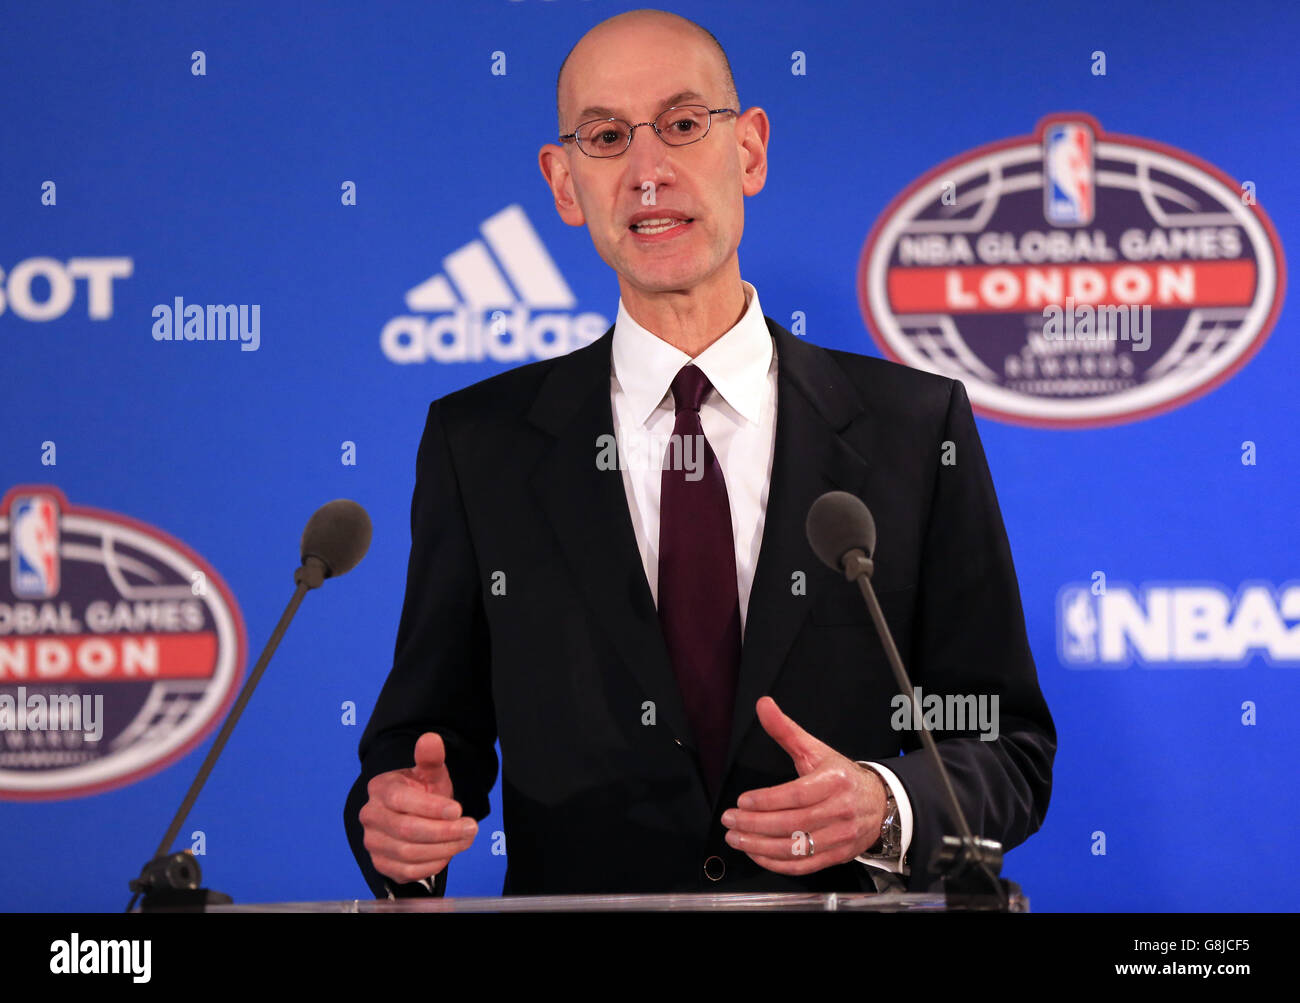 NBA Commissioner Adam Silver before the NBA Global Games match at the O2 Arena, London. Stock Photo